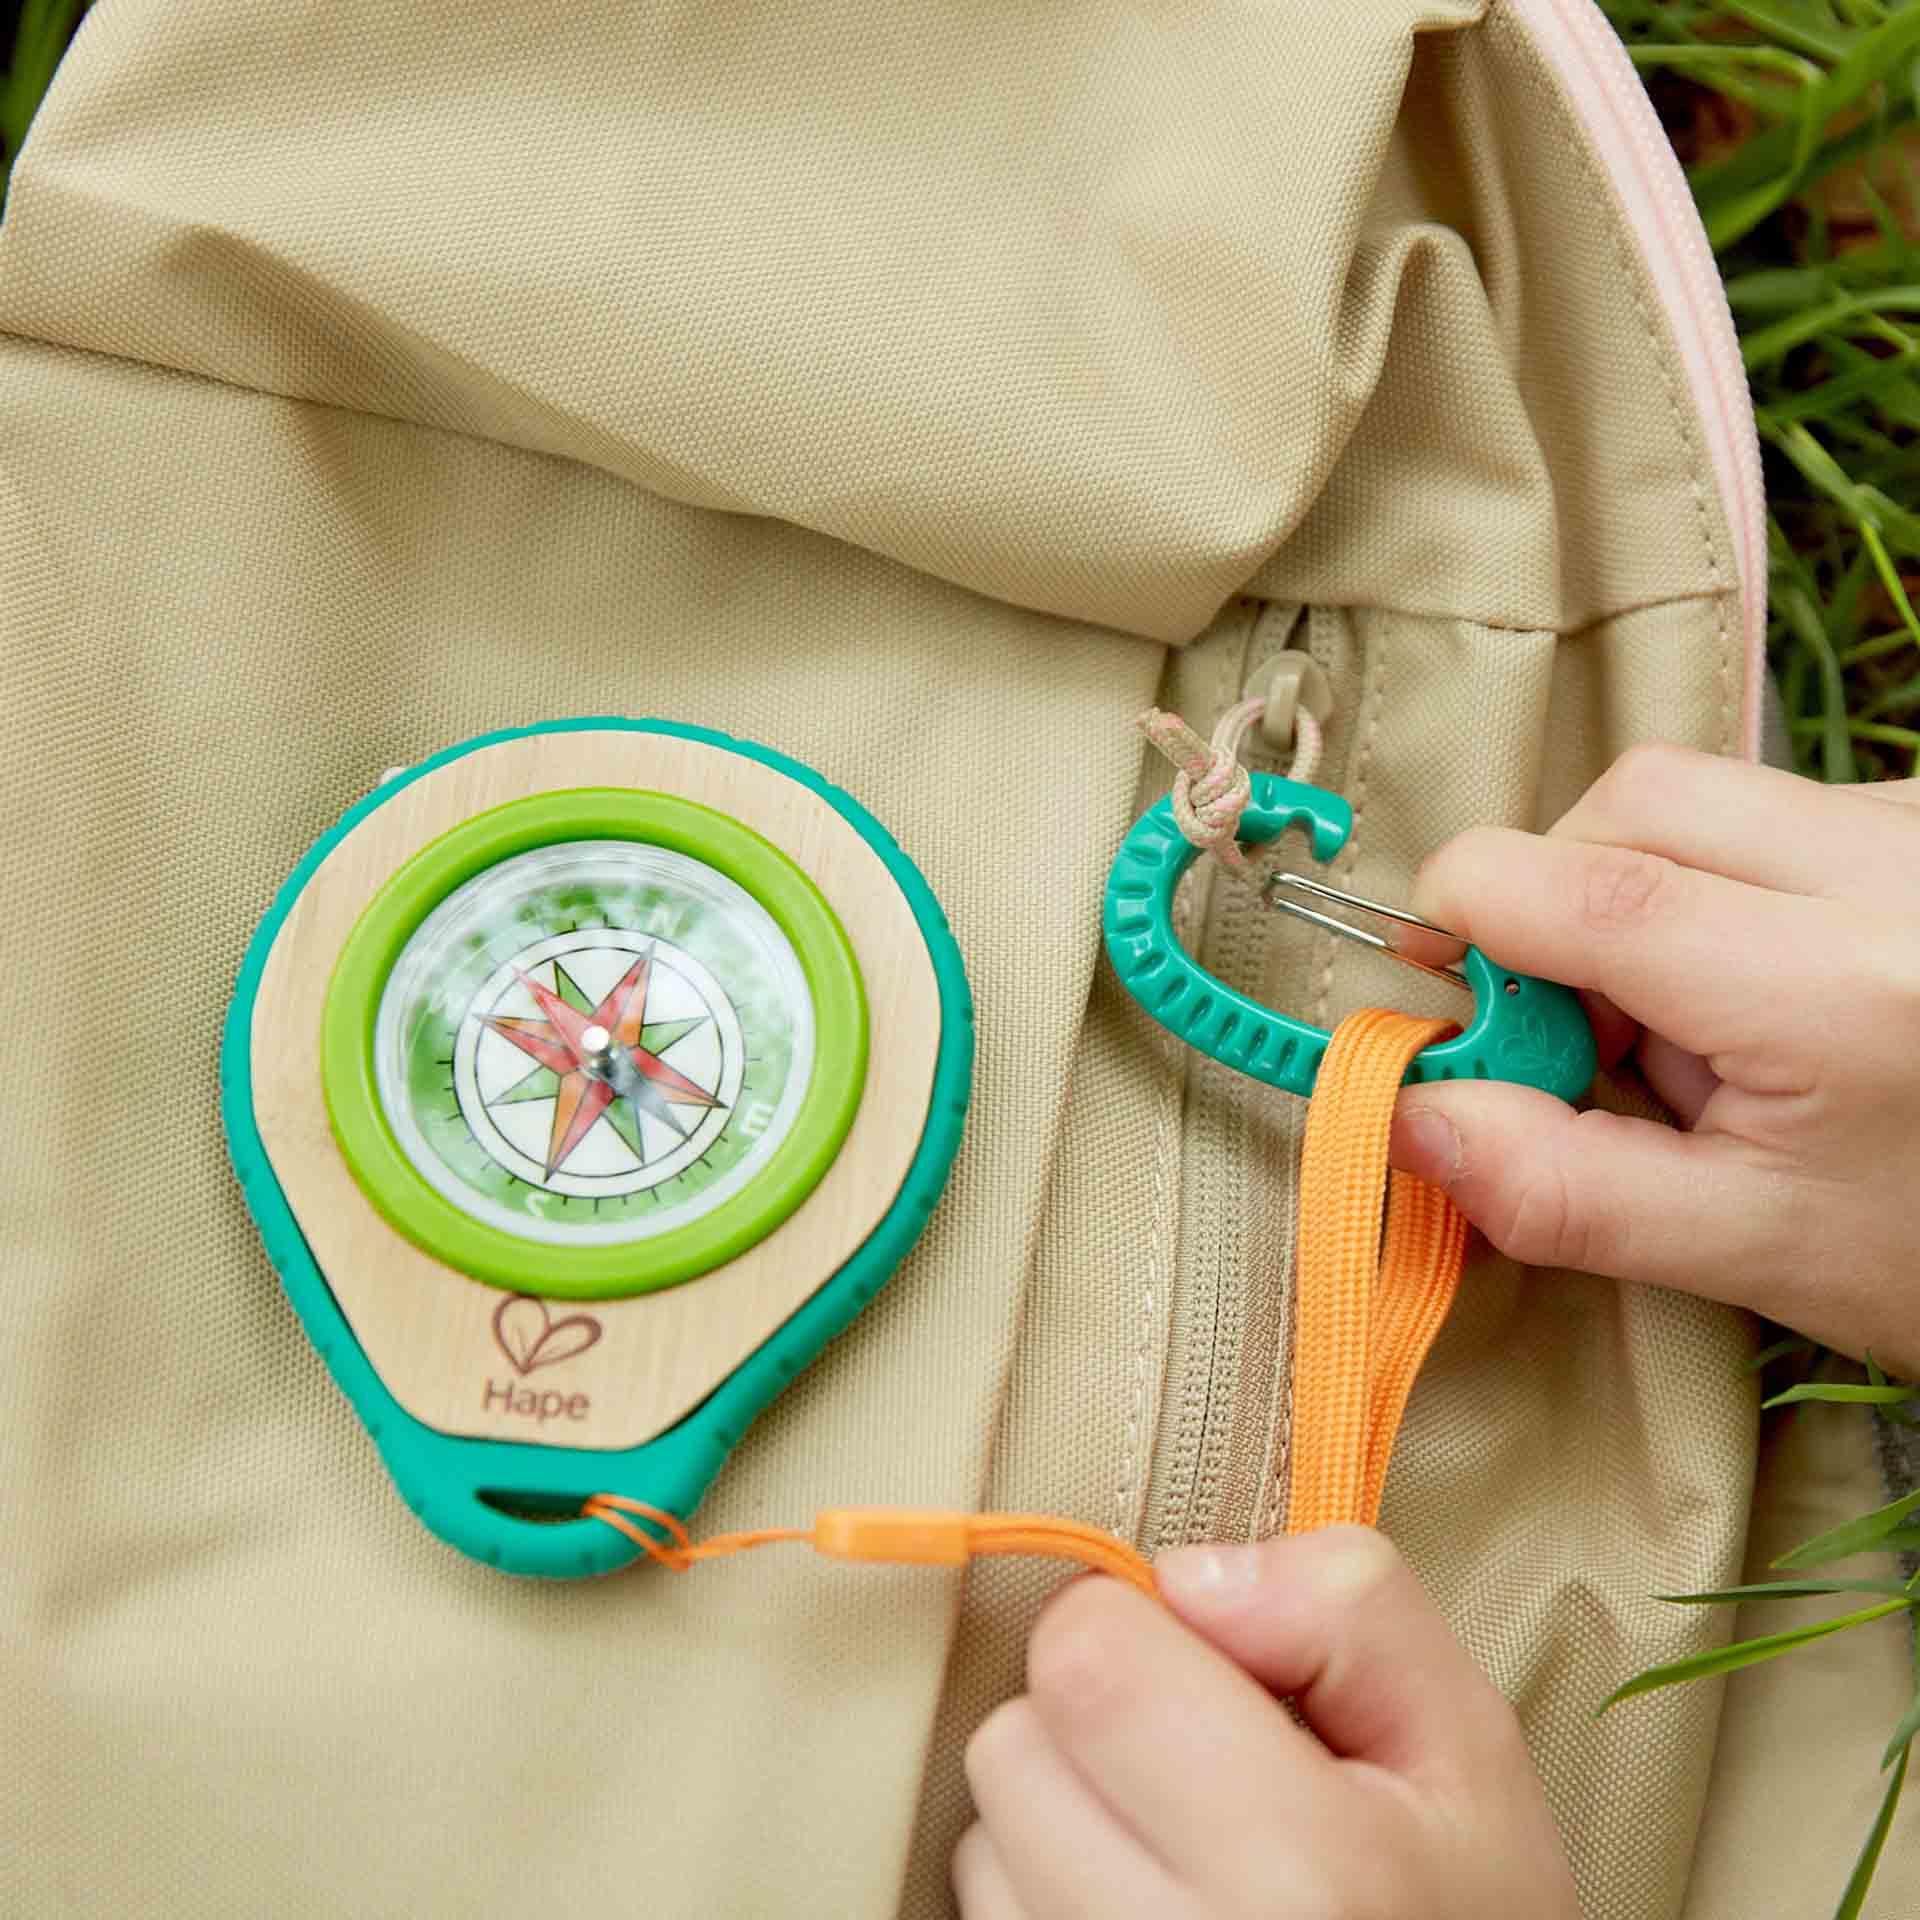 Child's hands attaching the compass using the green carabiner to buff-coloured backpack.